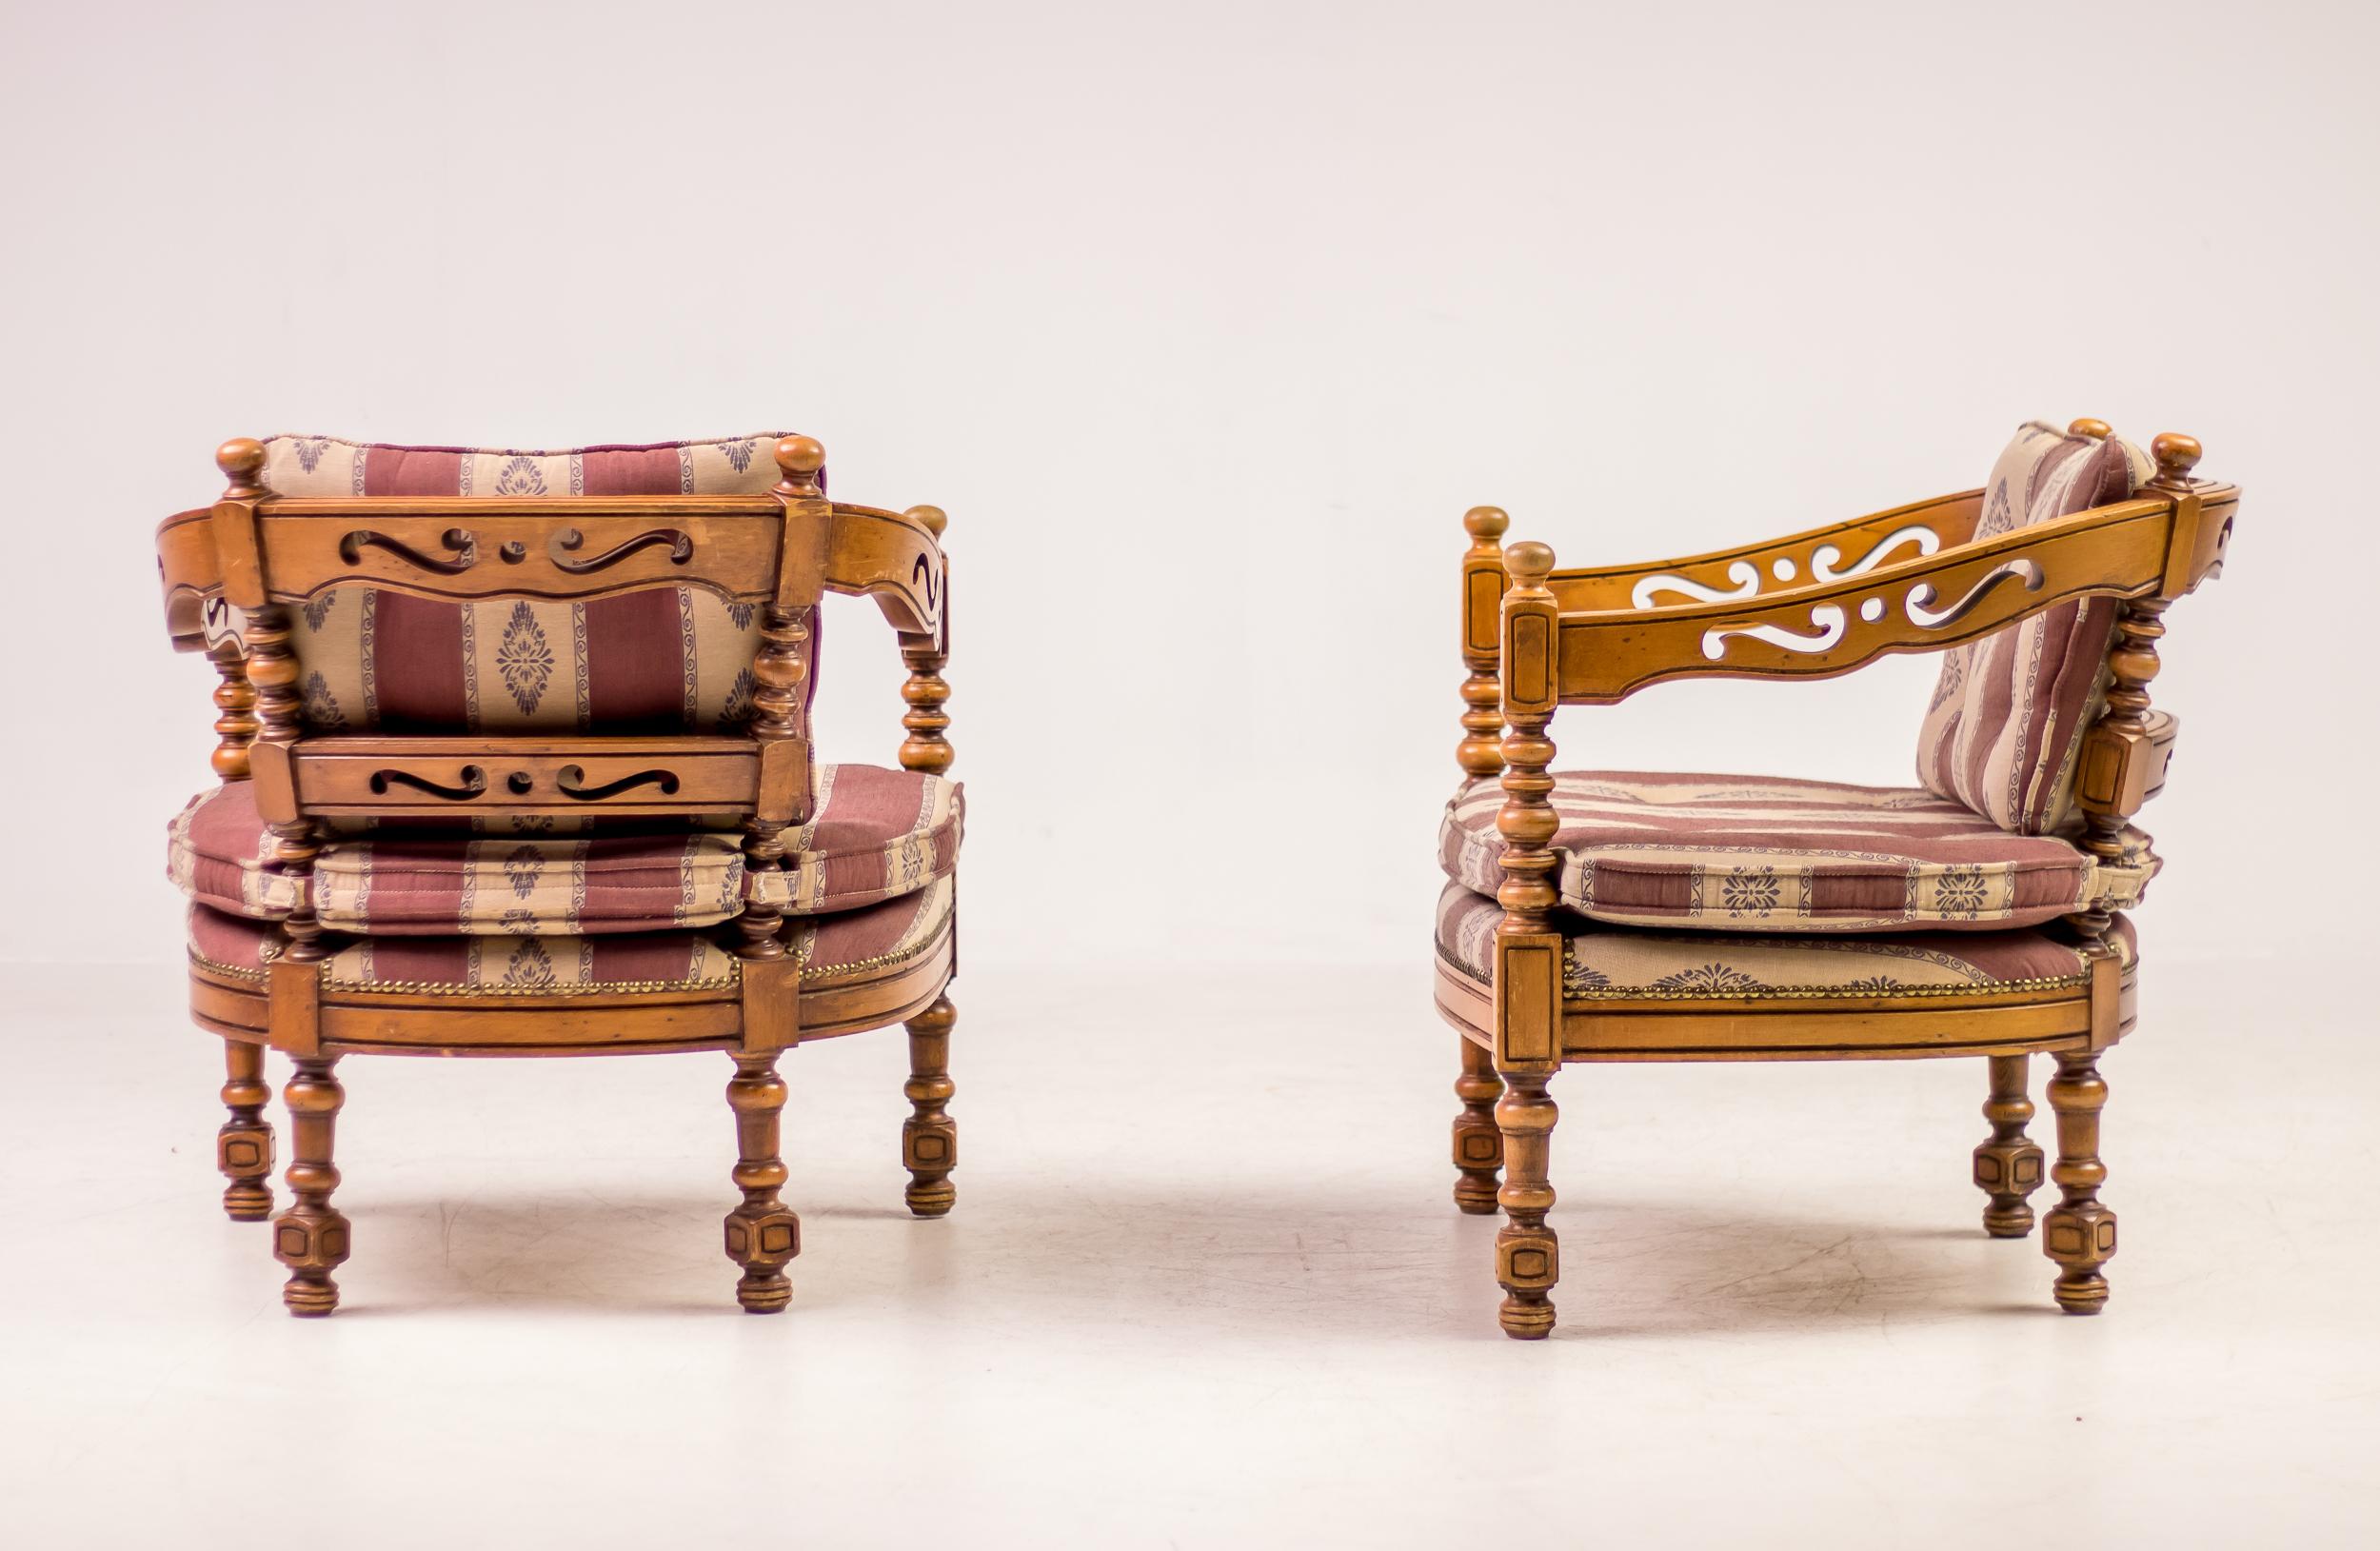 Distinguished Giorgetti armchairs of the 1975 Gallery collection.
Rare classic Italian set of carved wood armchairs with original upholstery in very good condition.
Priced as a set of 2, we have second pair set available that is in need of